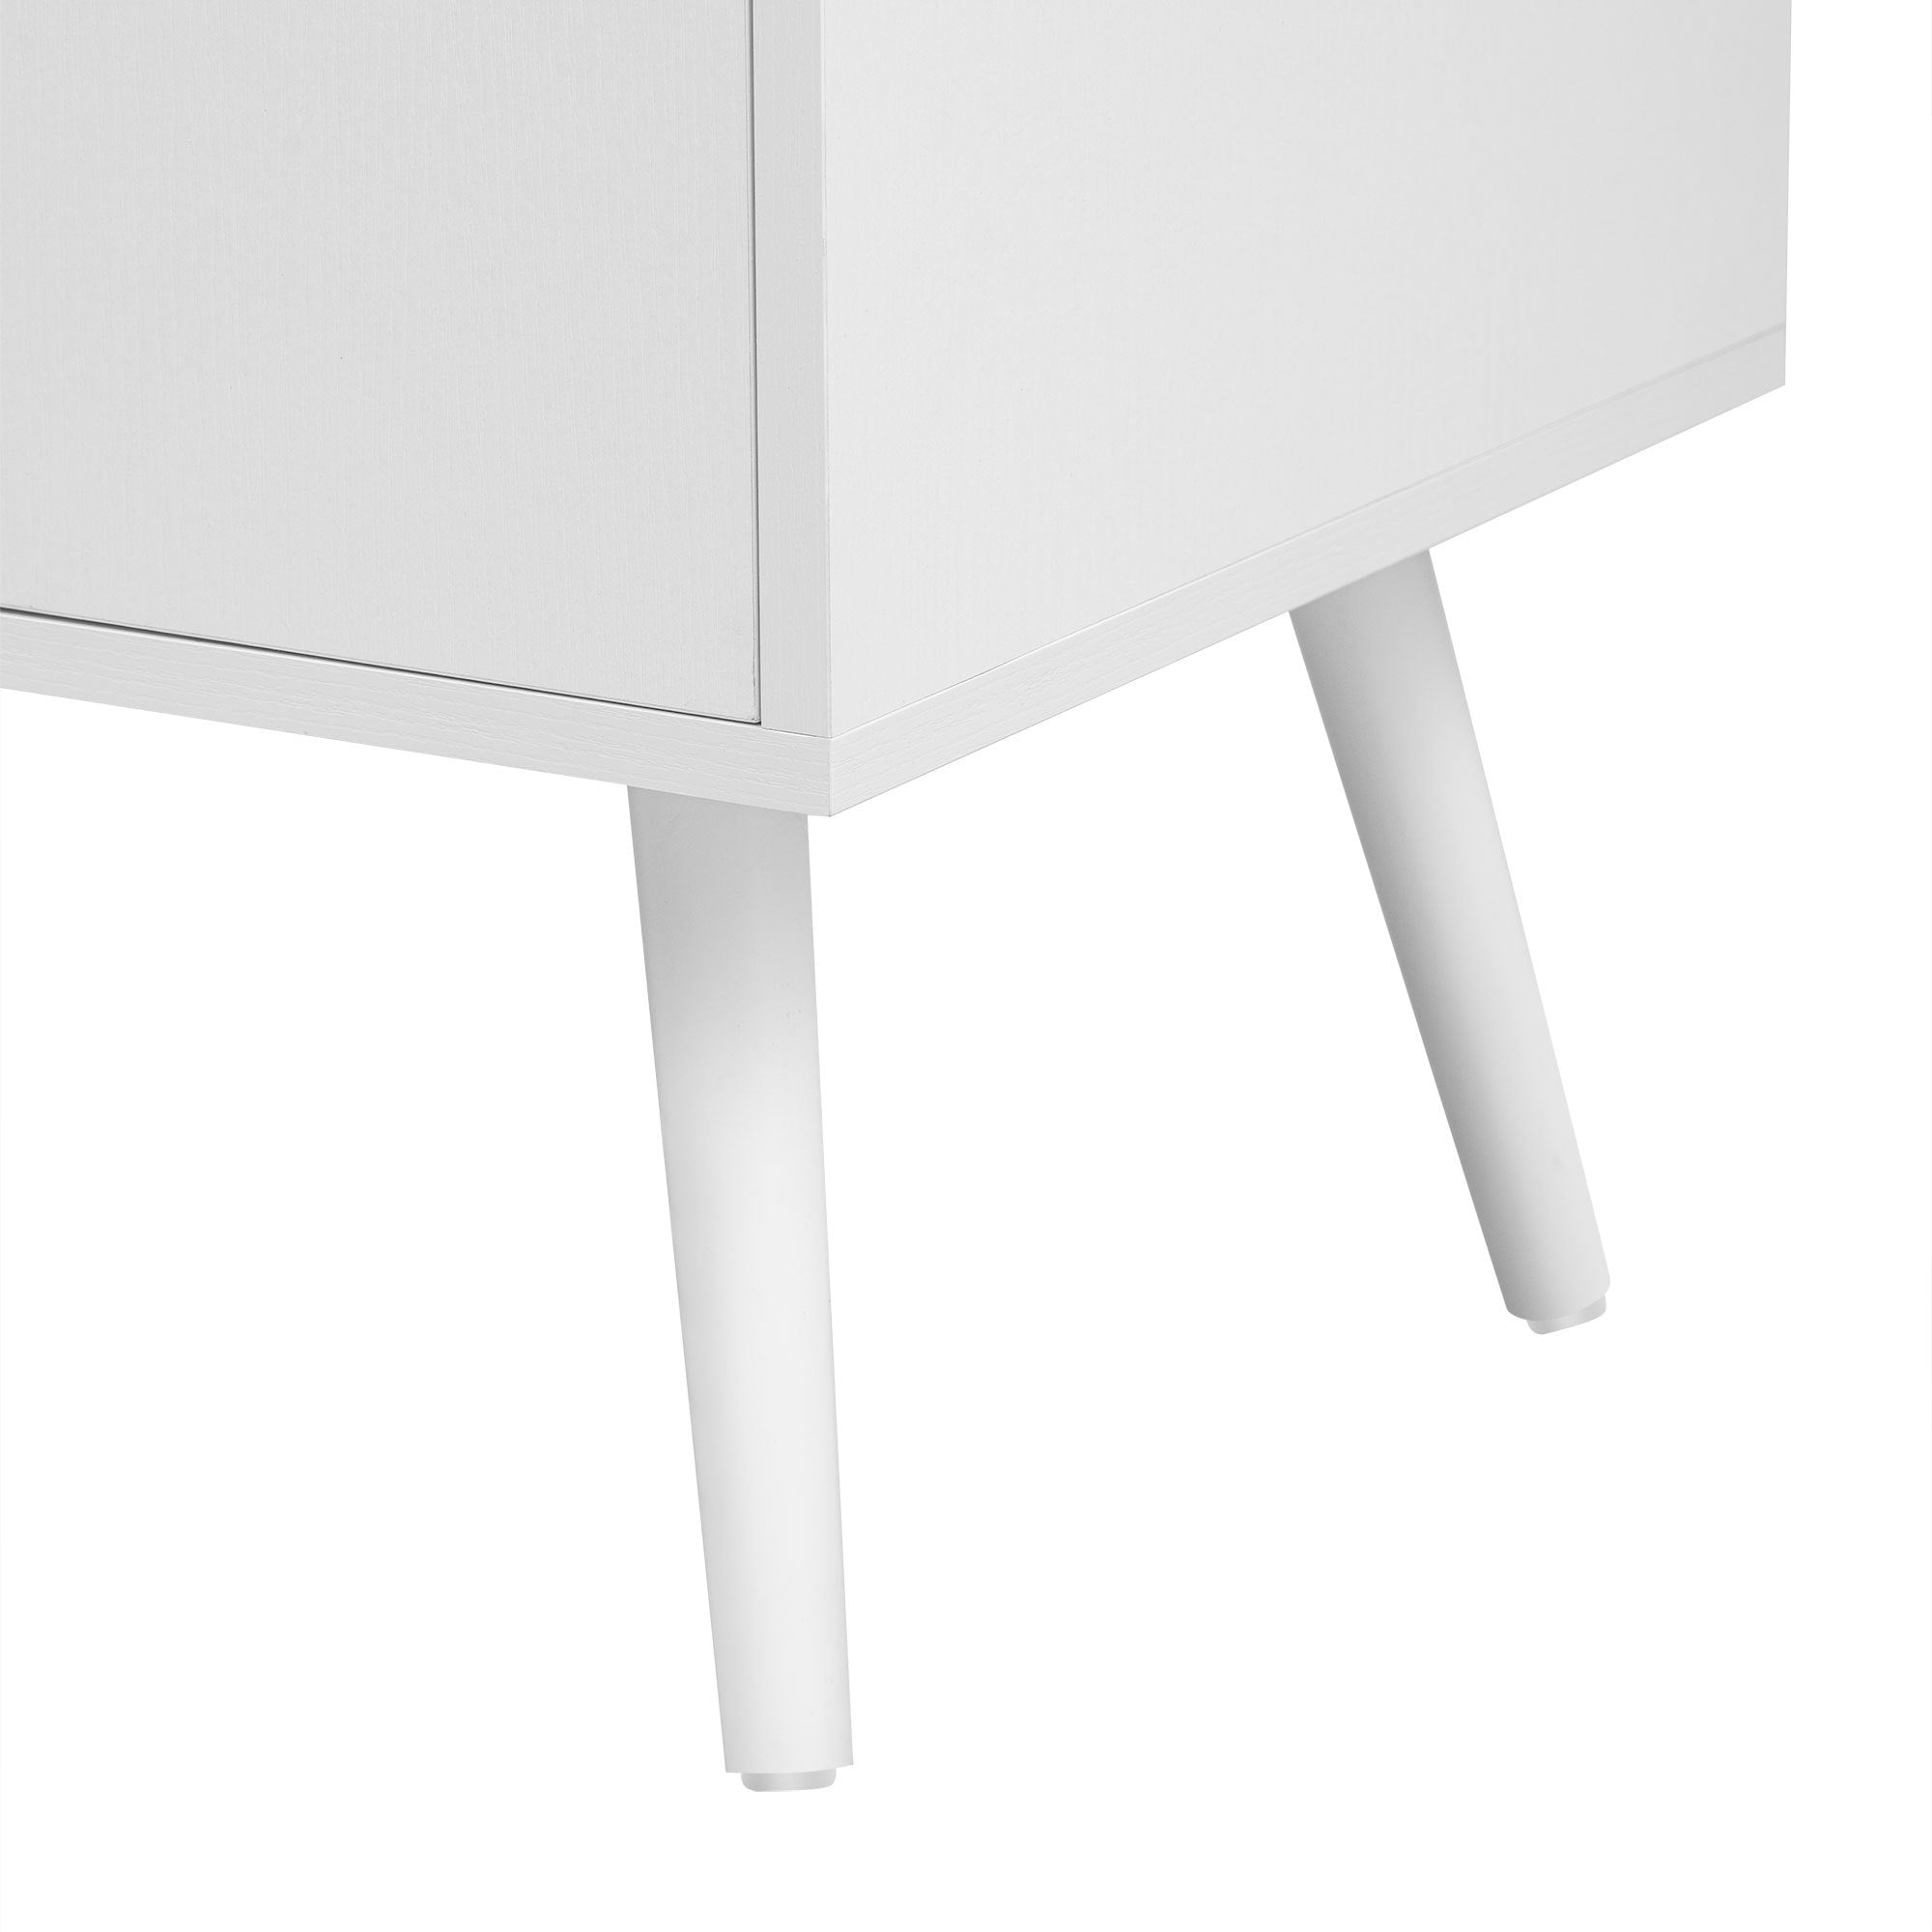 U Style Modern Cabinet with 2 Doors and 3 Drawers white-mdf